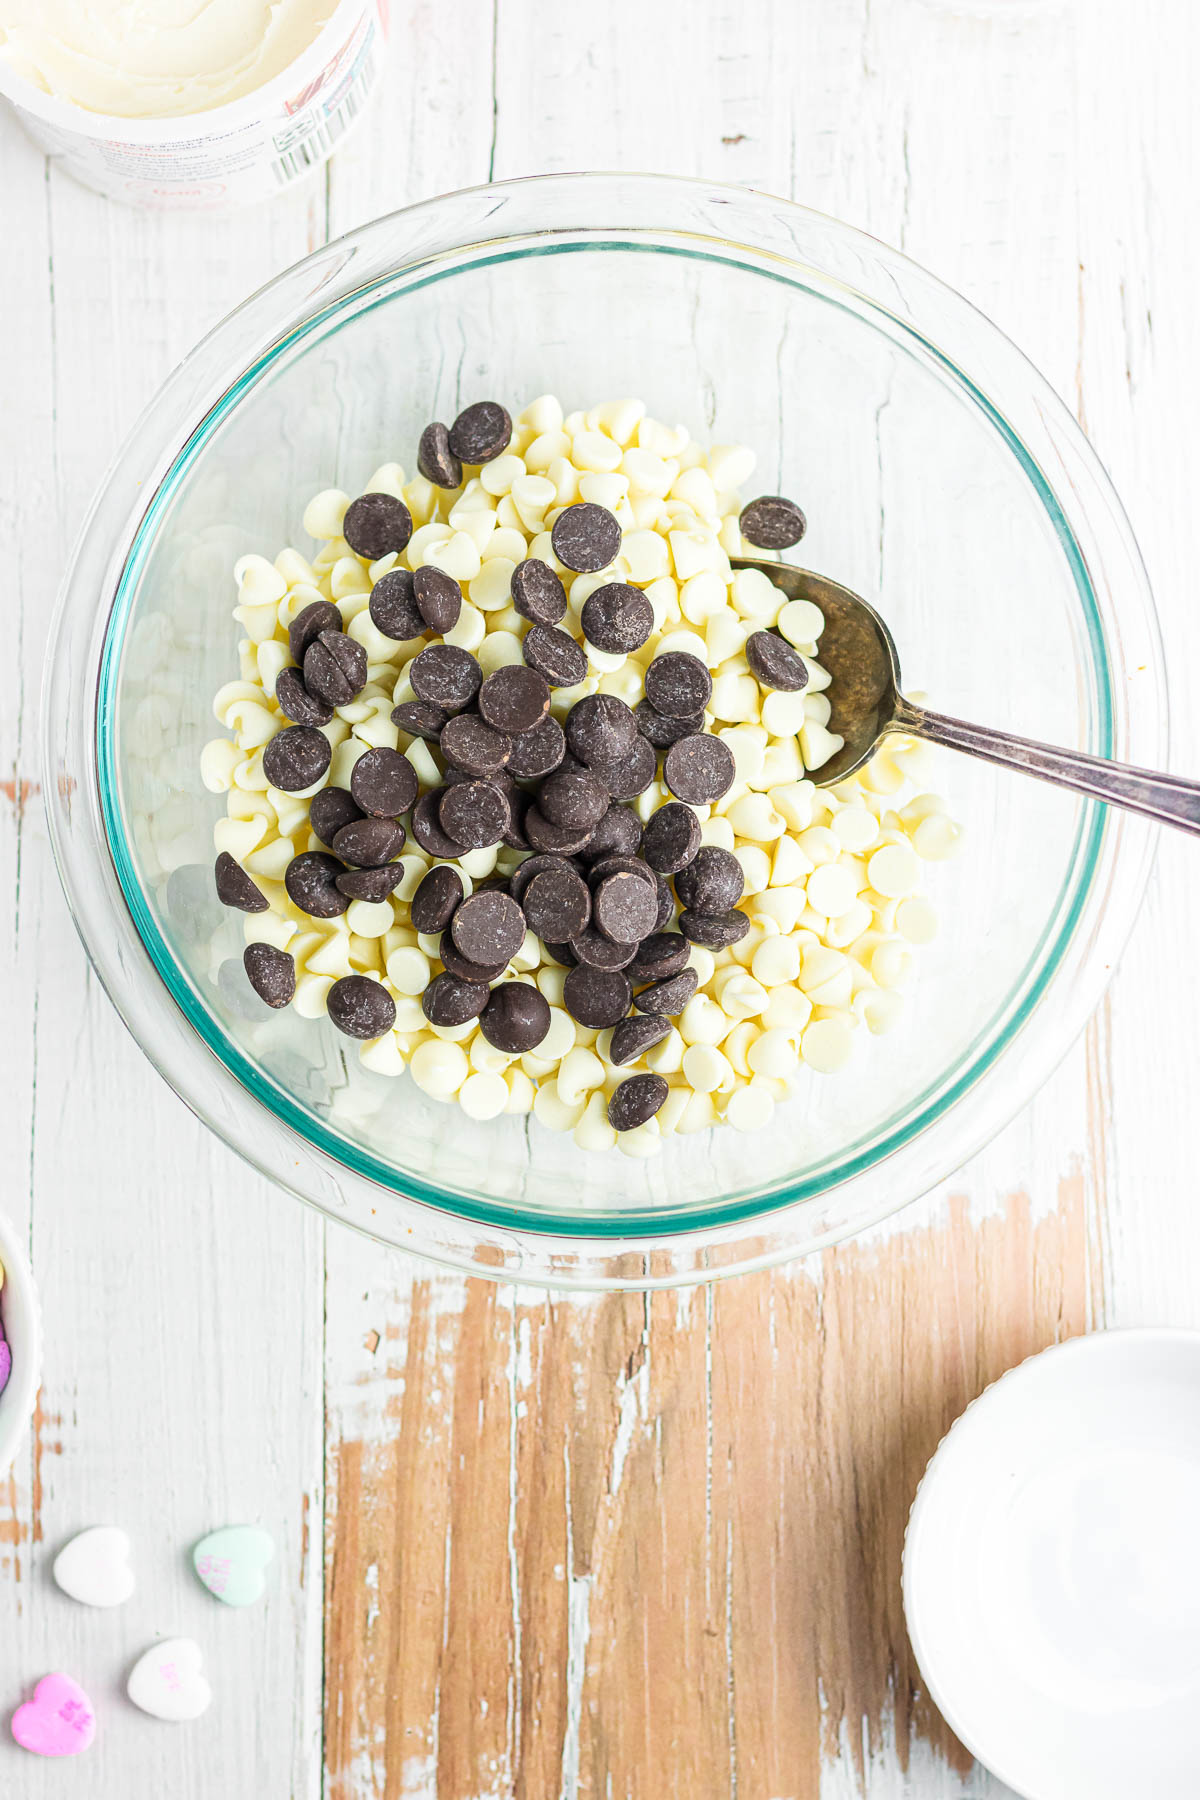 White and regular chocolate chips in a bowl.